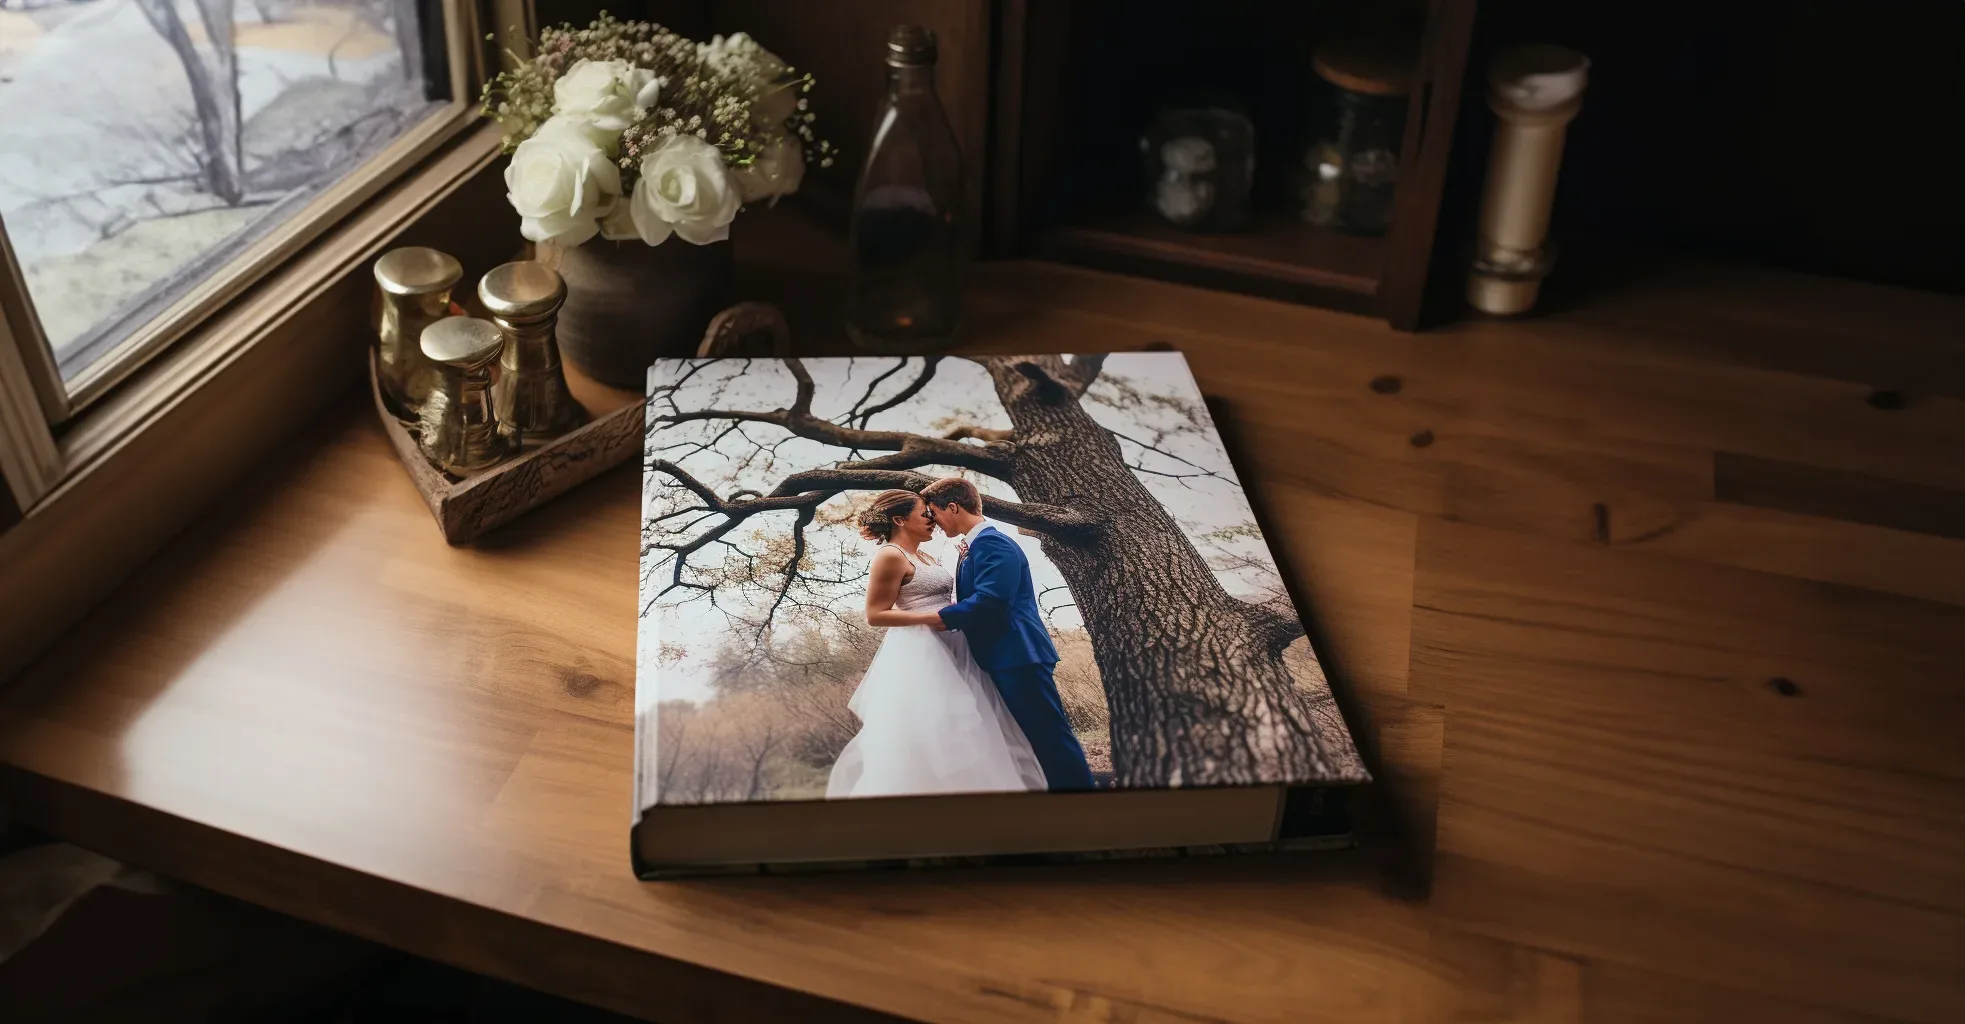 A wedding photo book on a table next to a window. wedding collection prices